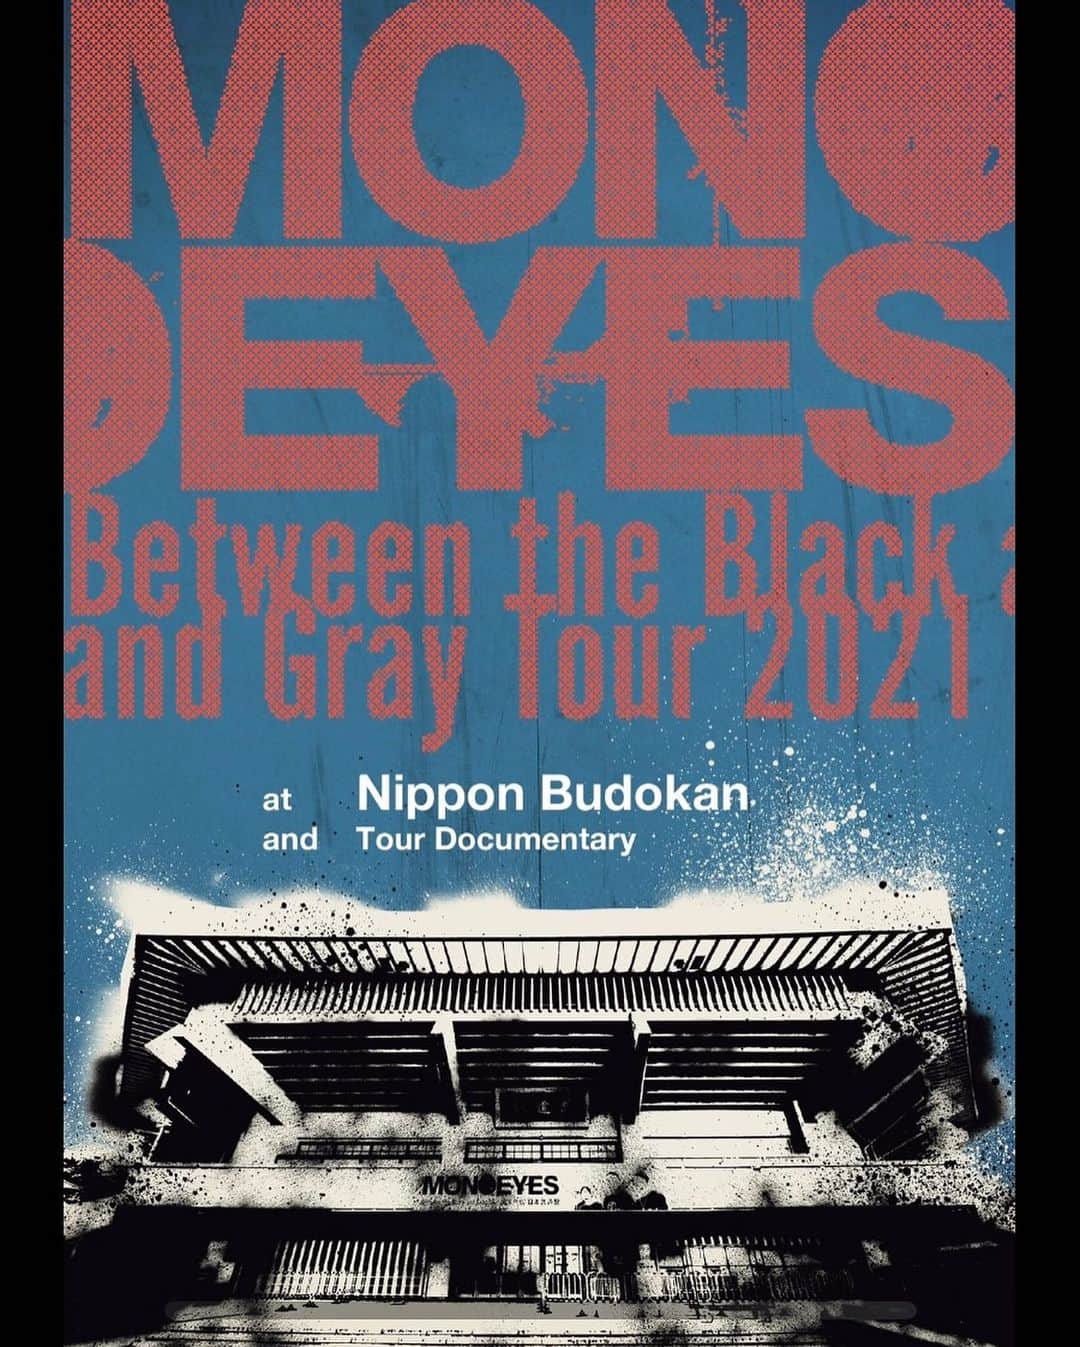 MONOEYESのインスタグラム：「昨年開催したライブツアー「Between the Black and Gray Tour 2021」より、11月2日 (火) 日本武道館公演を収めたライブDVD＆Blu-rayのリリース決定！ ライブ映像に加えて90分におよぶツアードキュメンタリー映像も収録！  📀MONOEYES 3rd DVD＆Blu-ray 「Between the Black and Gray Tour 2021 at Nippon Budokan and Tour Documentary」  💥2022年5月11日 (水) 発売💥  【DVD】(2枚組) UPBH-20287/8 ￥2,970 (税込) 【Blu-ray】UPXH-20112 ￥3,960 (税込)  ＜収録内容＞ 🔸Between the Black and Gray Tour 2021 at Nippon Budokan  Fall Out Bygone Run Run Free Throw Interstate 46 Cold Reaction Like We’ve Never Lost Roxette Get Up Iridescent Light Nothing グラニート When I Was A King Somewhere On Fullerton  明日公園で Borders & Walls Two Little Fishes Outer Rim My Instant Song リザードマン  - Encore - 3, 2, 1 Go 彼は誰の夢  - Double Encore - Remember Me  🔸Tour Documentary 90分におよぶツアードキュメンタリー映像を収録  Apple Music、Spotify、LINE MUSIC 日本武道館セットリストプレイリスト 🔻https://lnk.to/BtBaGT2021」